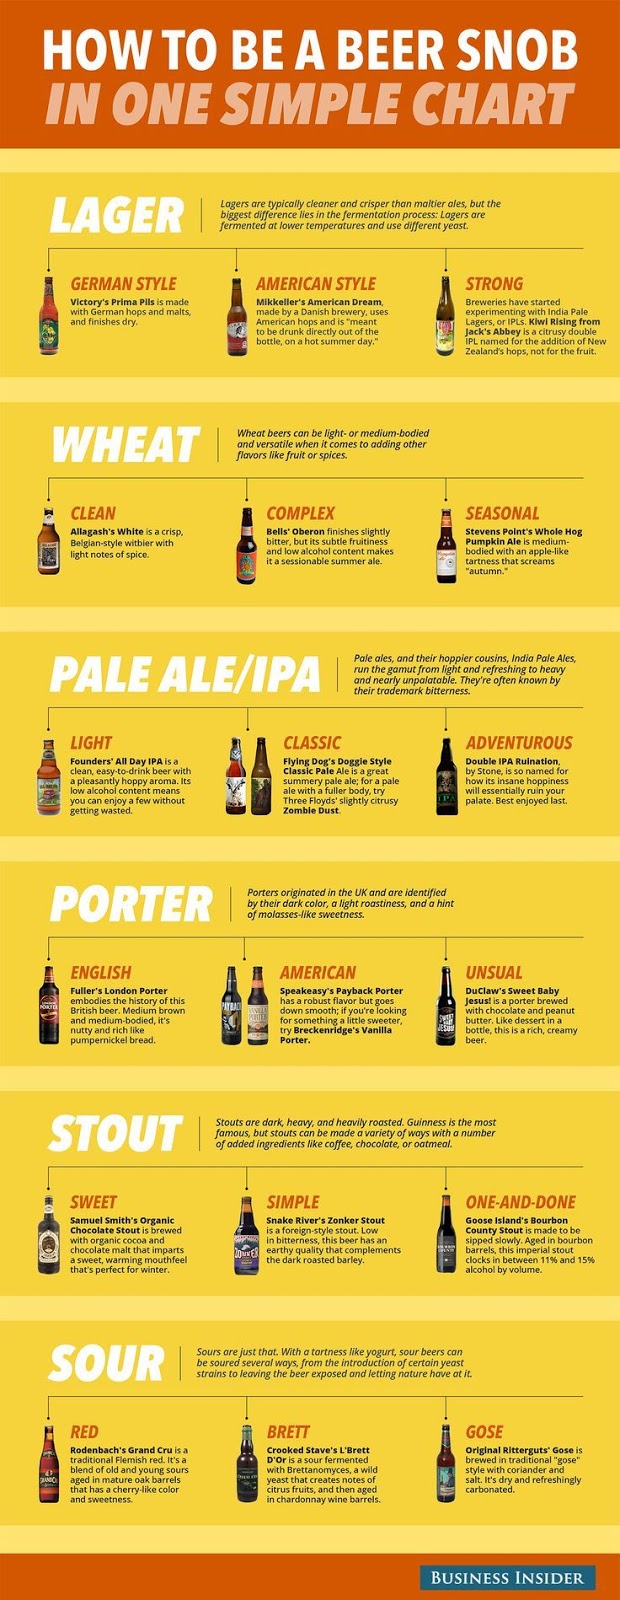 brew-boss-electric-home-brewing-beer-chart